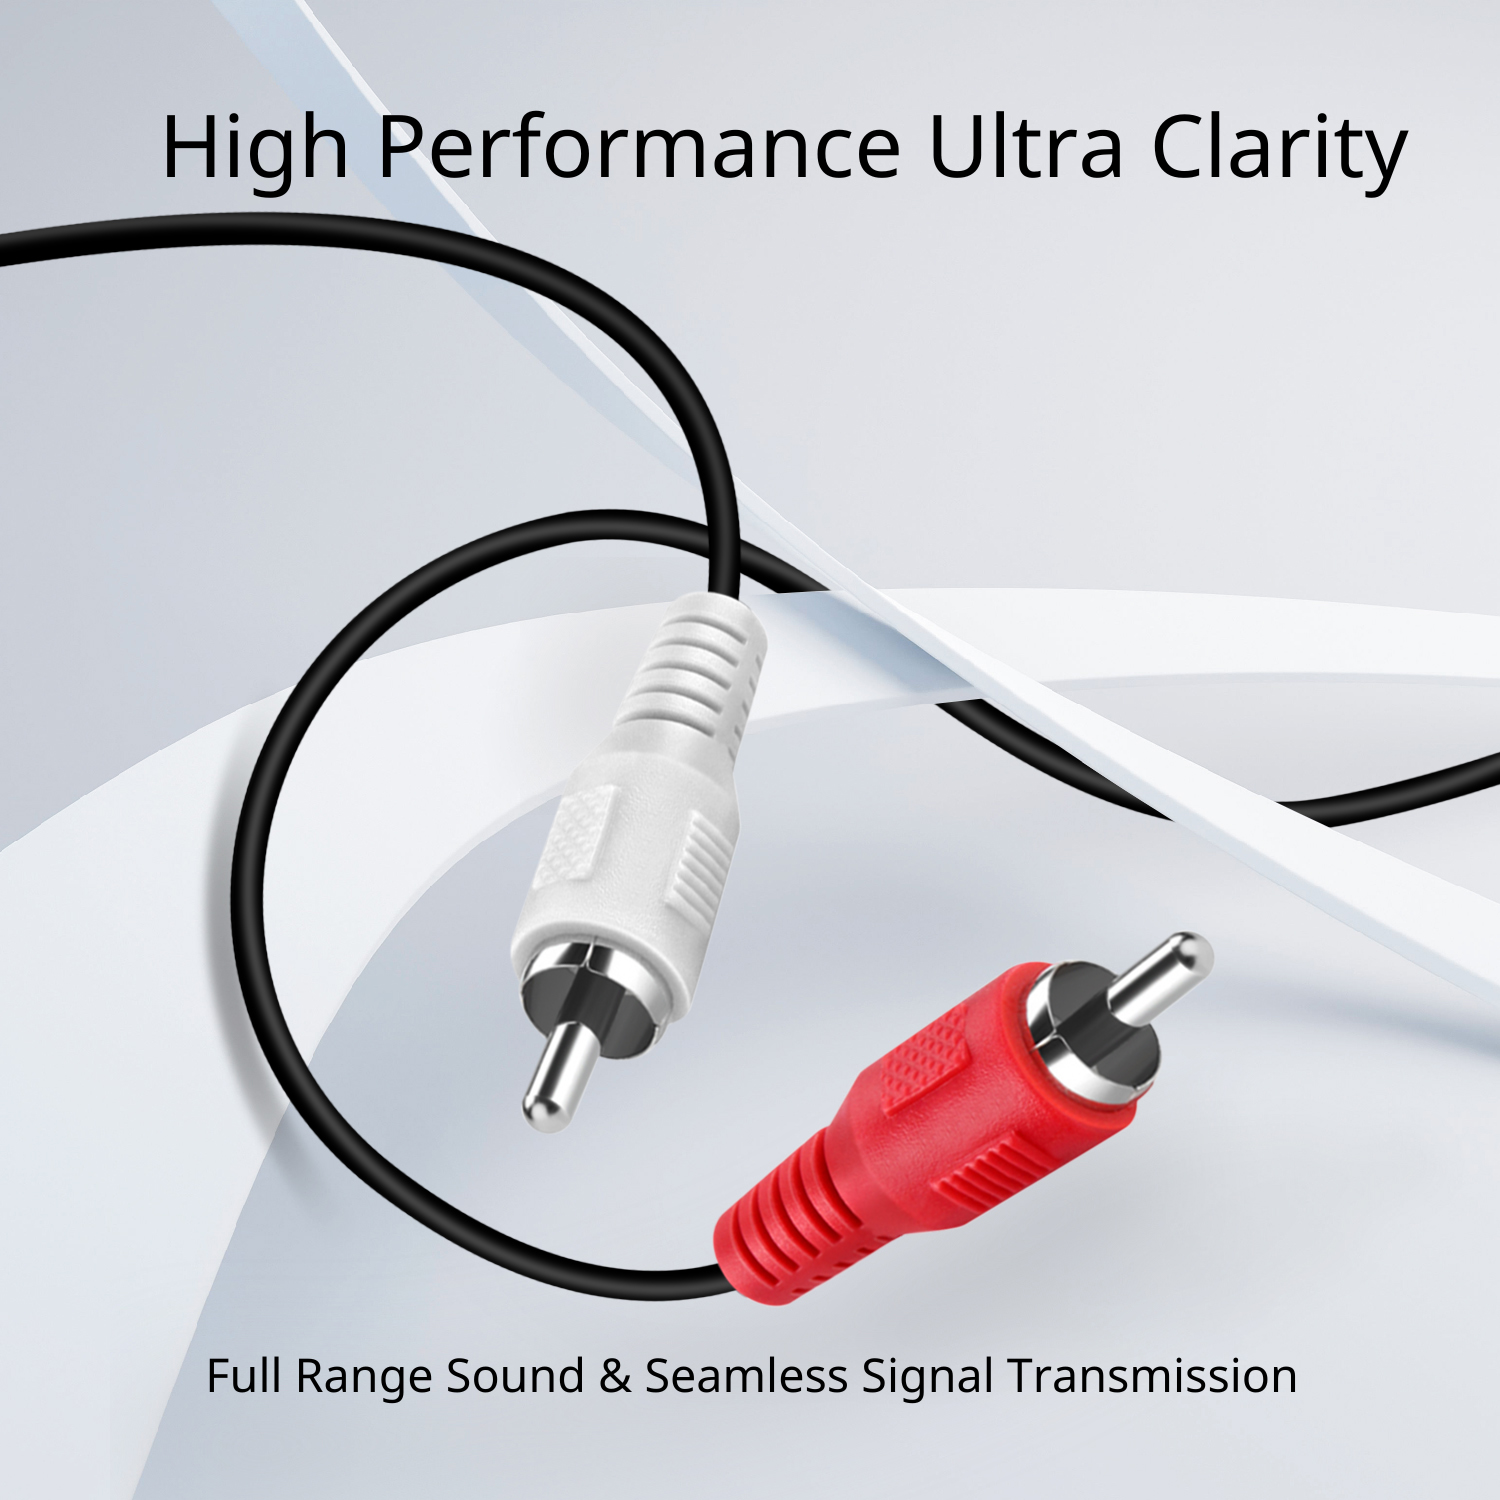 Delivers versatile full range of sound for your AV audio device equipment; Accurately transfer high frequency quality detailed clean natural pure audio sound / realism and clarity jitter-free in audio signals